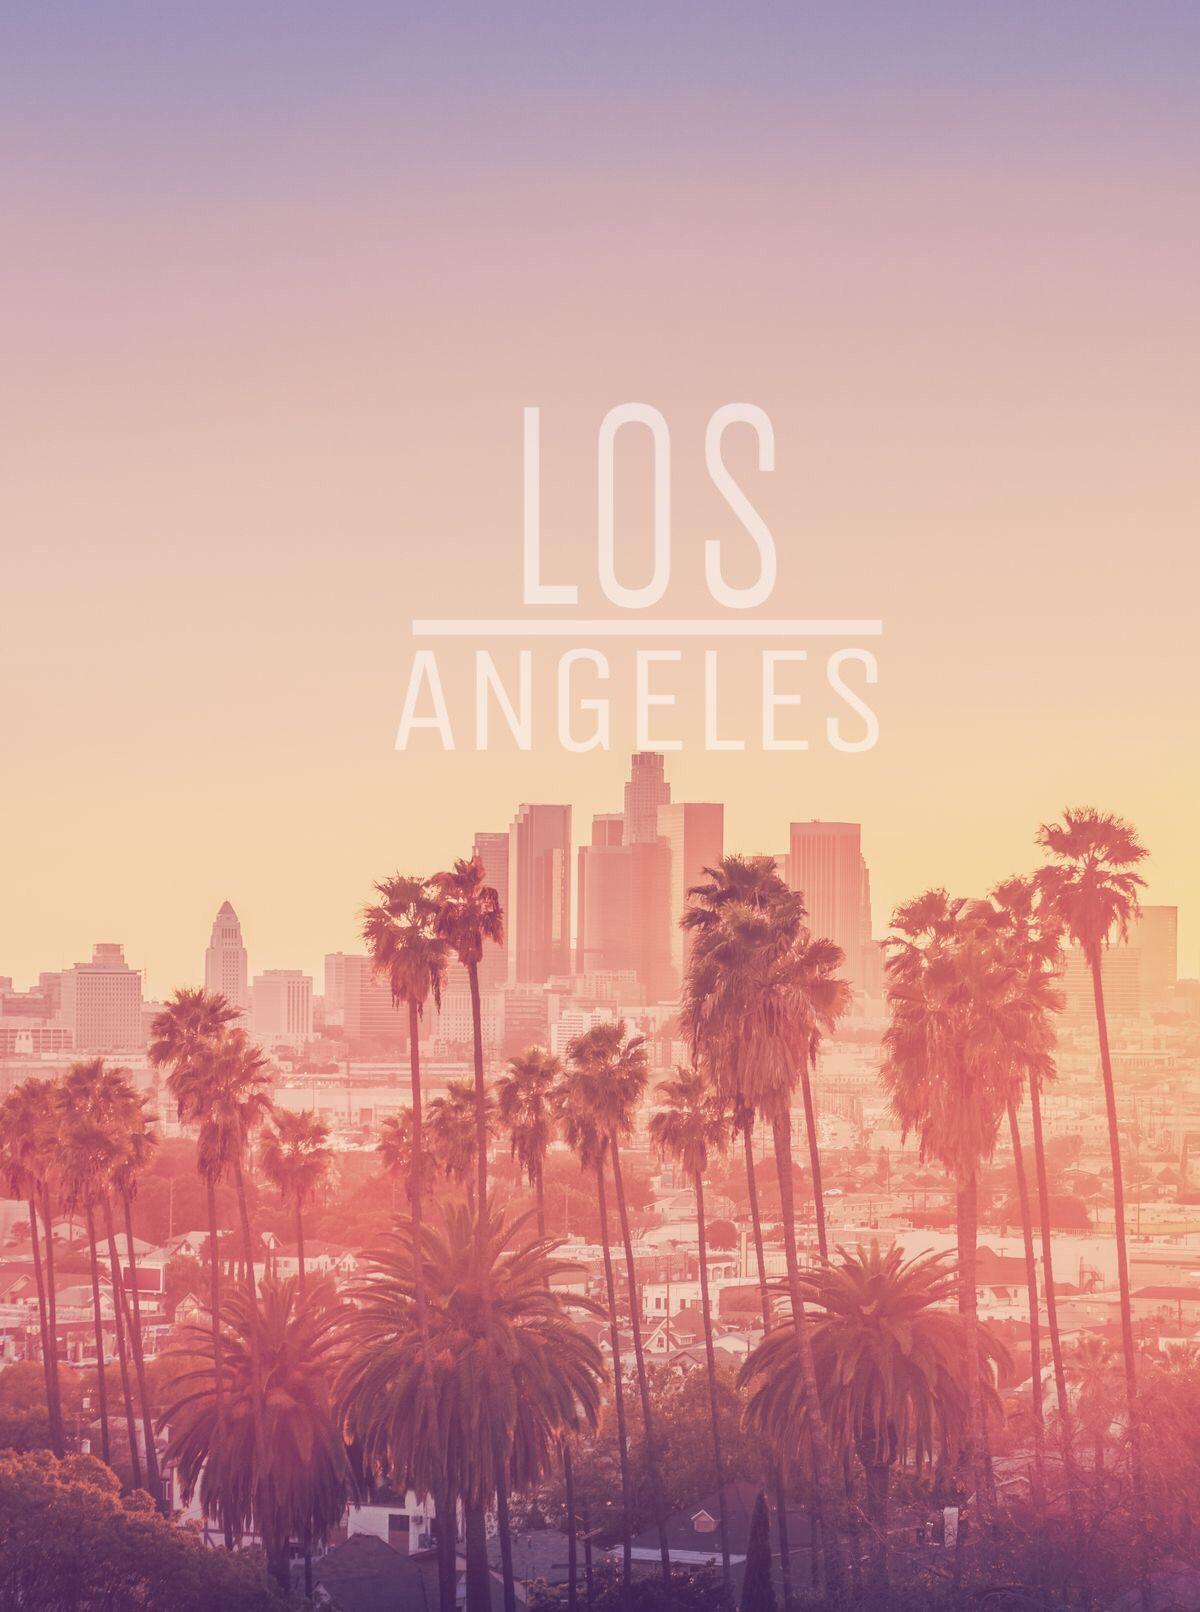 Los angeles wallpaper, Los angeles and Angeles